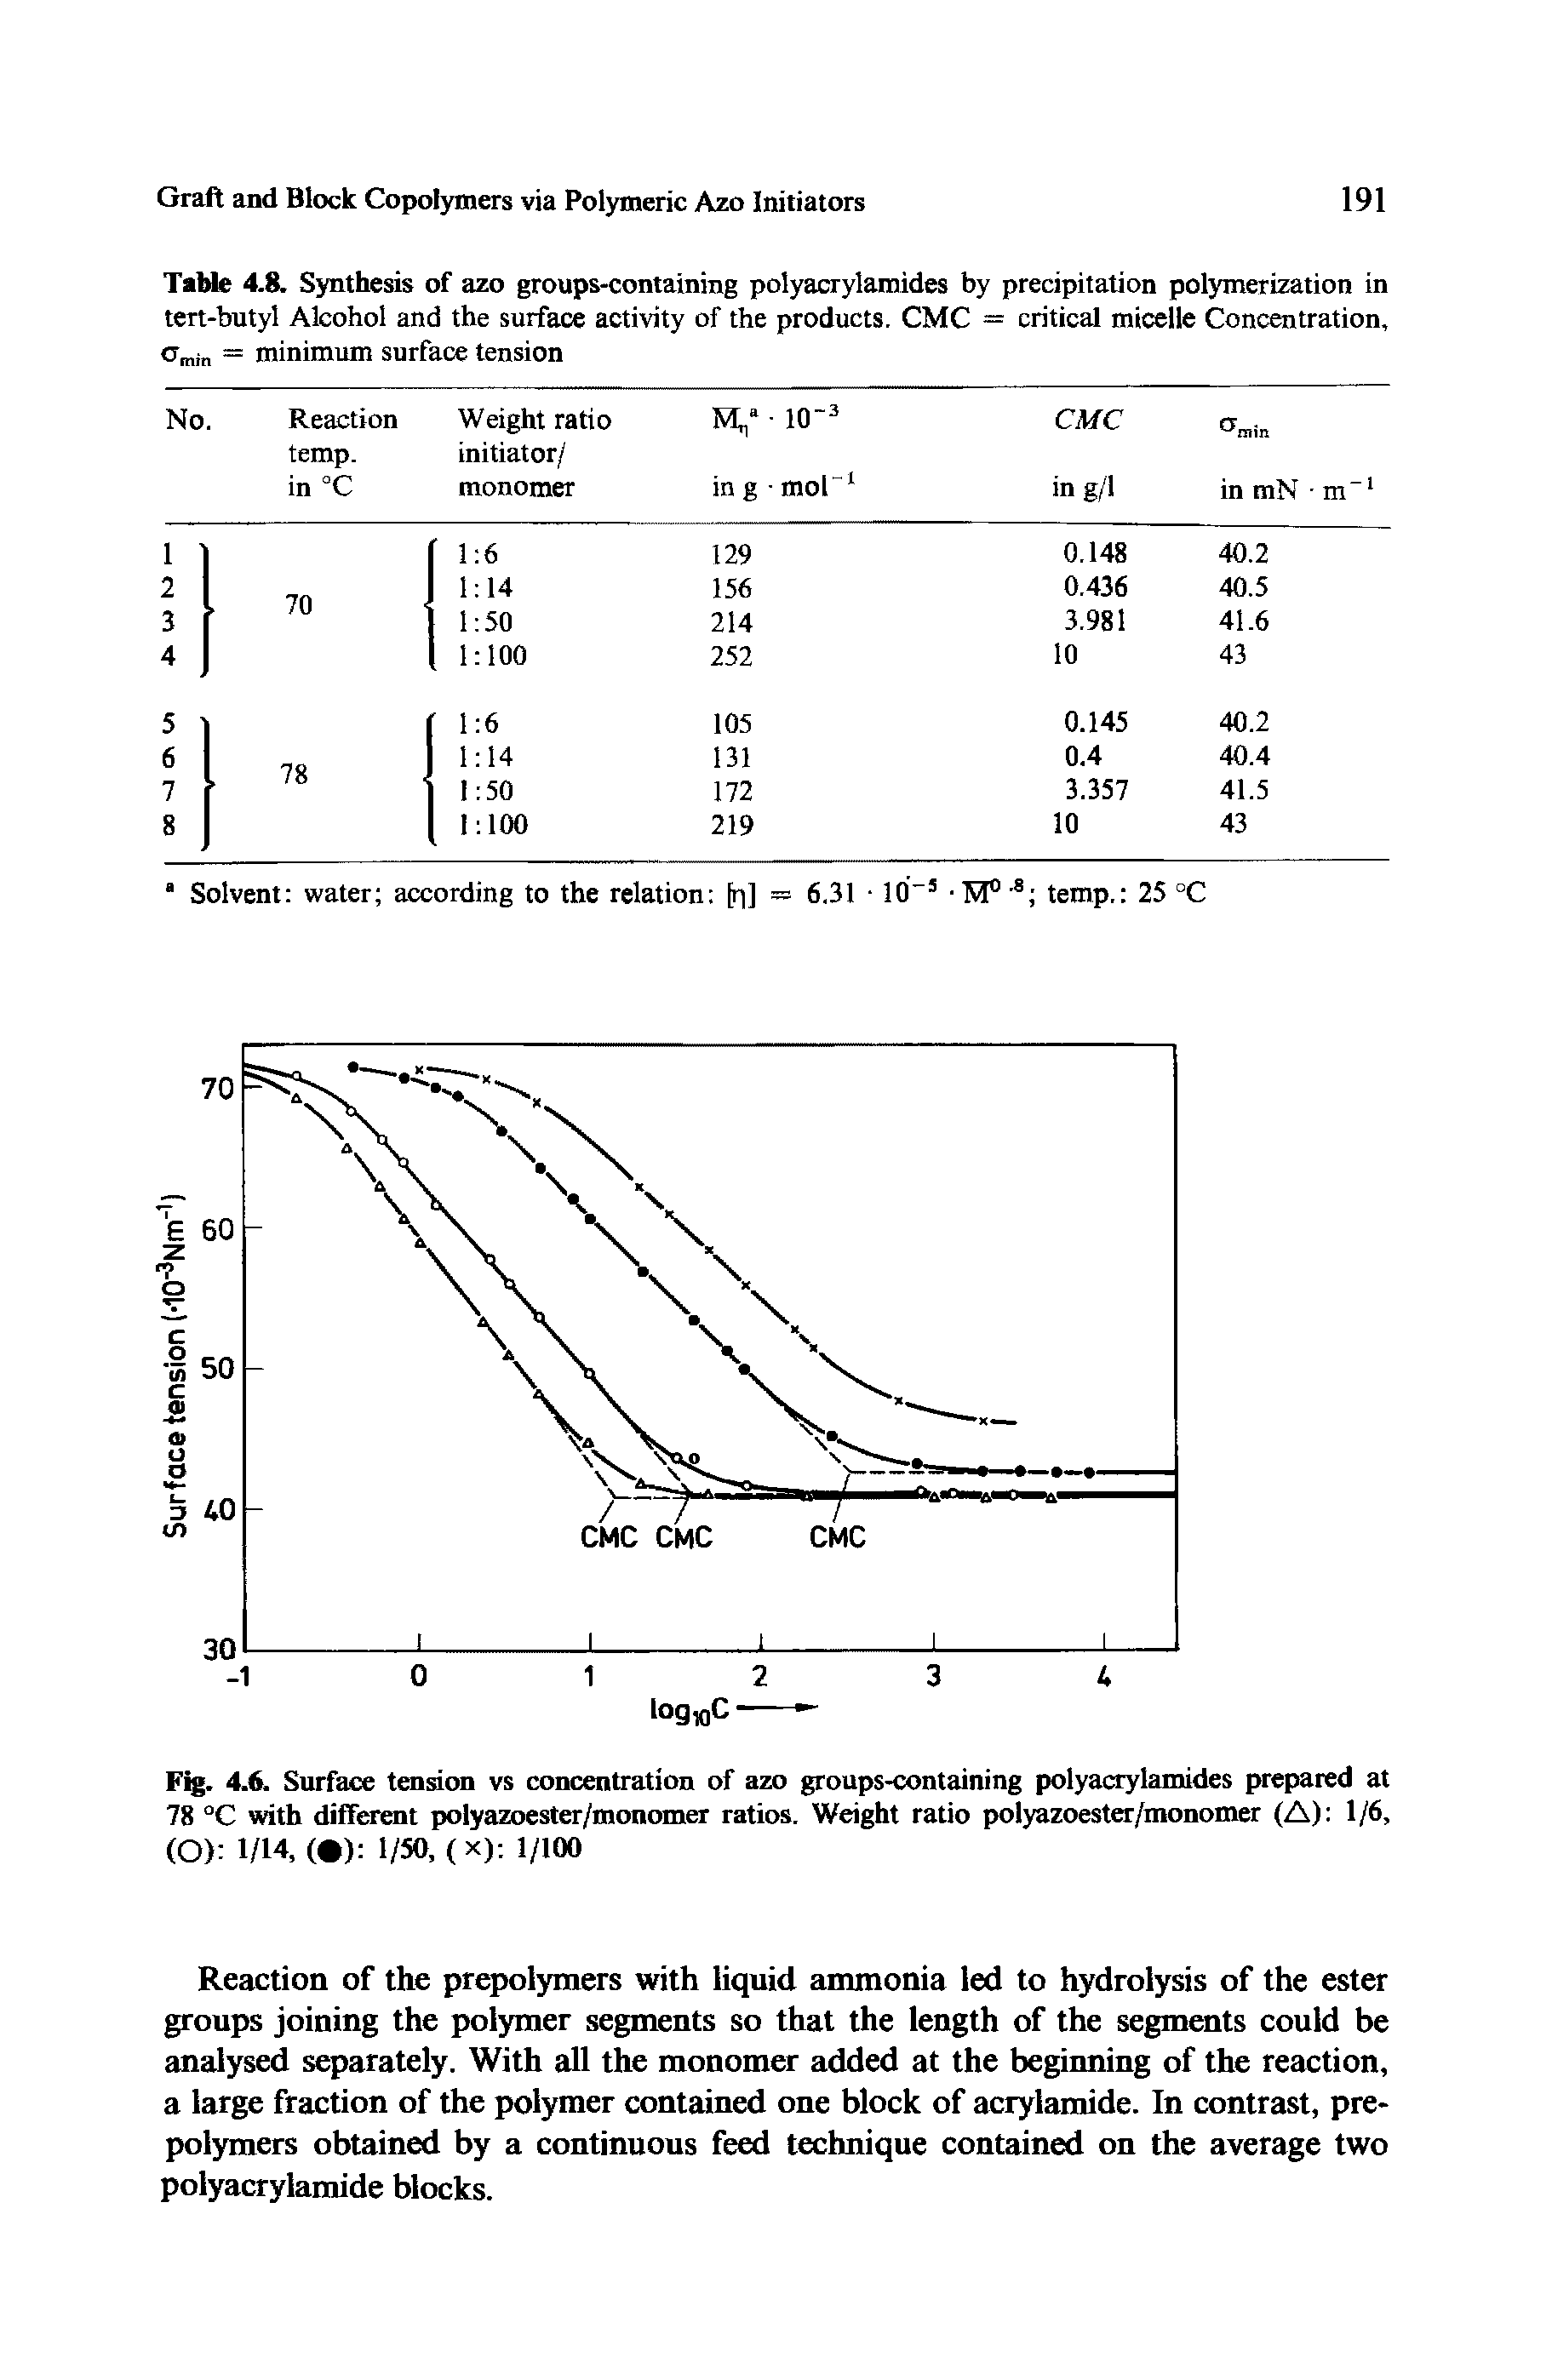 Fig. 4.6. Surface tension vs concentration of azo groups-containing polyacrylamides prepared at 78 °C with different polyazoester/monomer ratios. Weight ratio polyazoester/monomer (A) 1/6, (O) 1/14, ( ) 1/50, (x) 1/100...